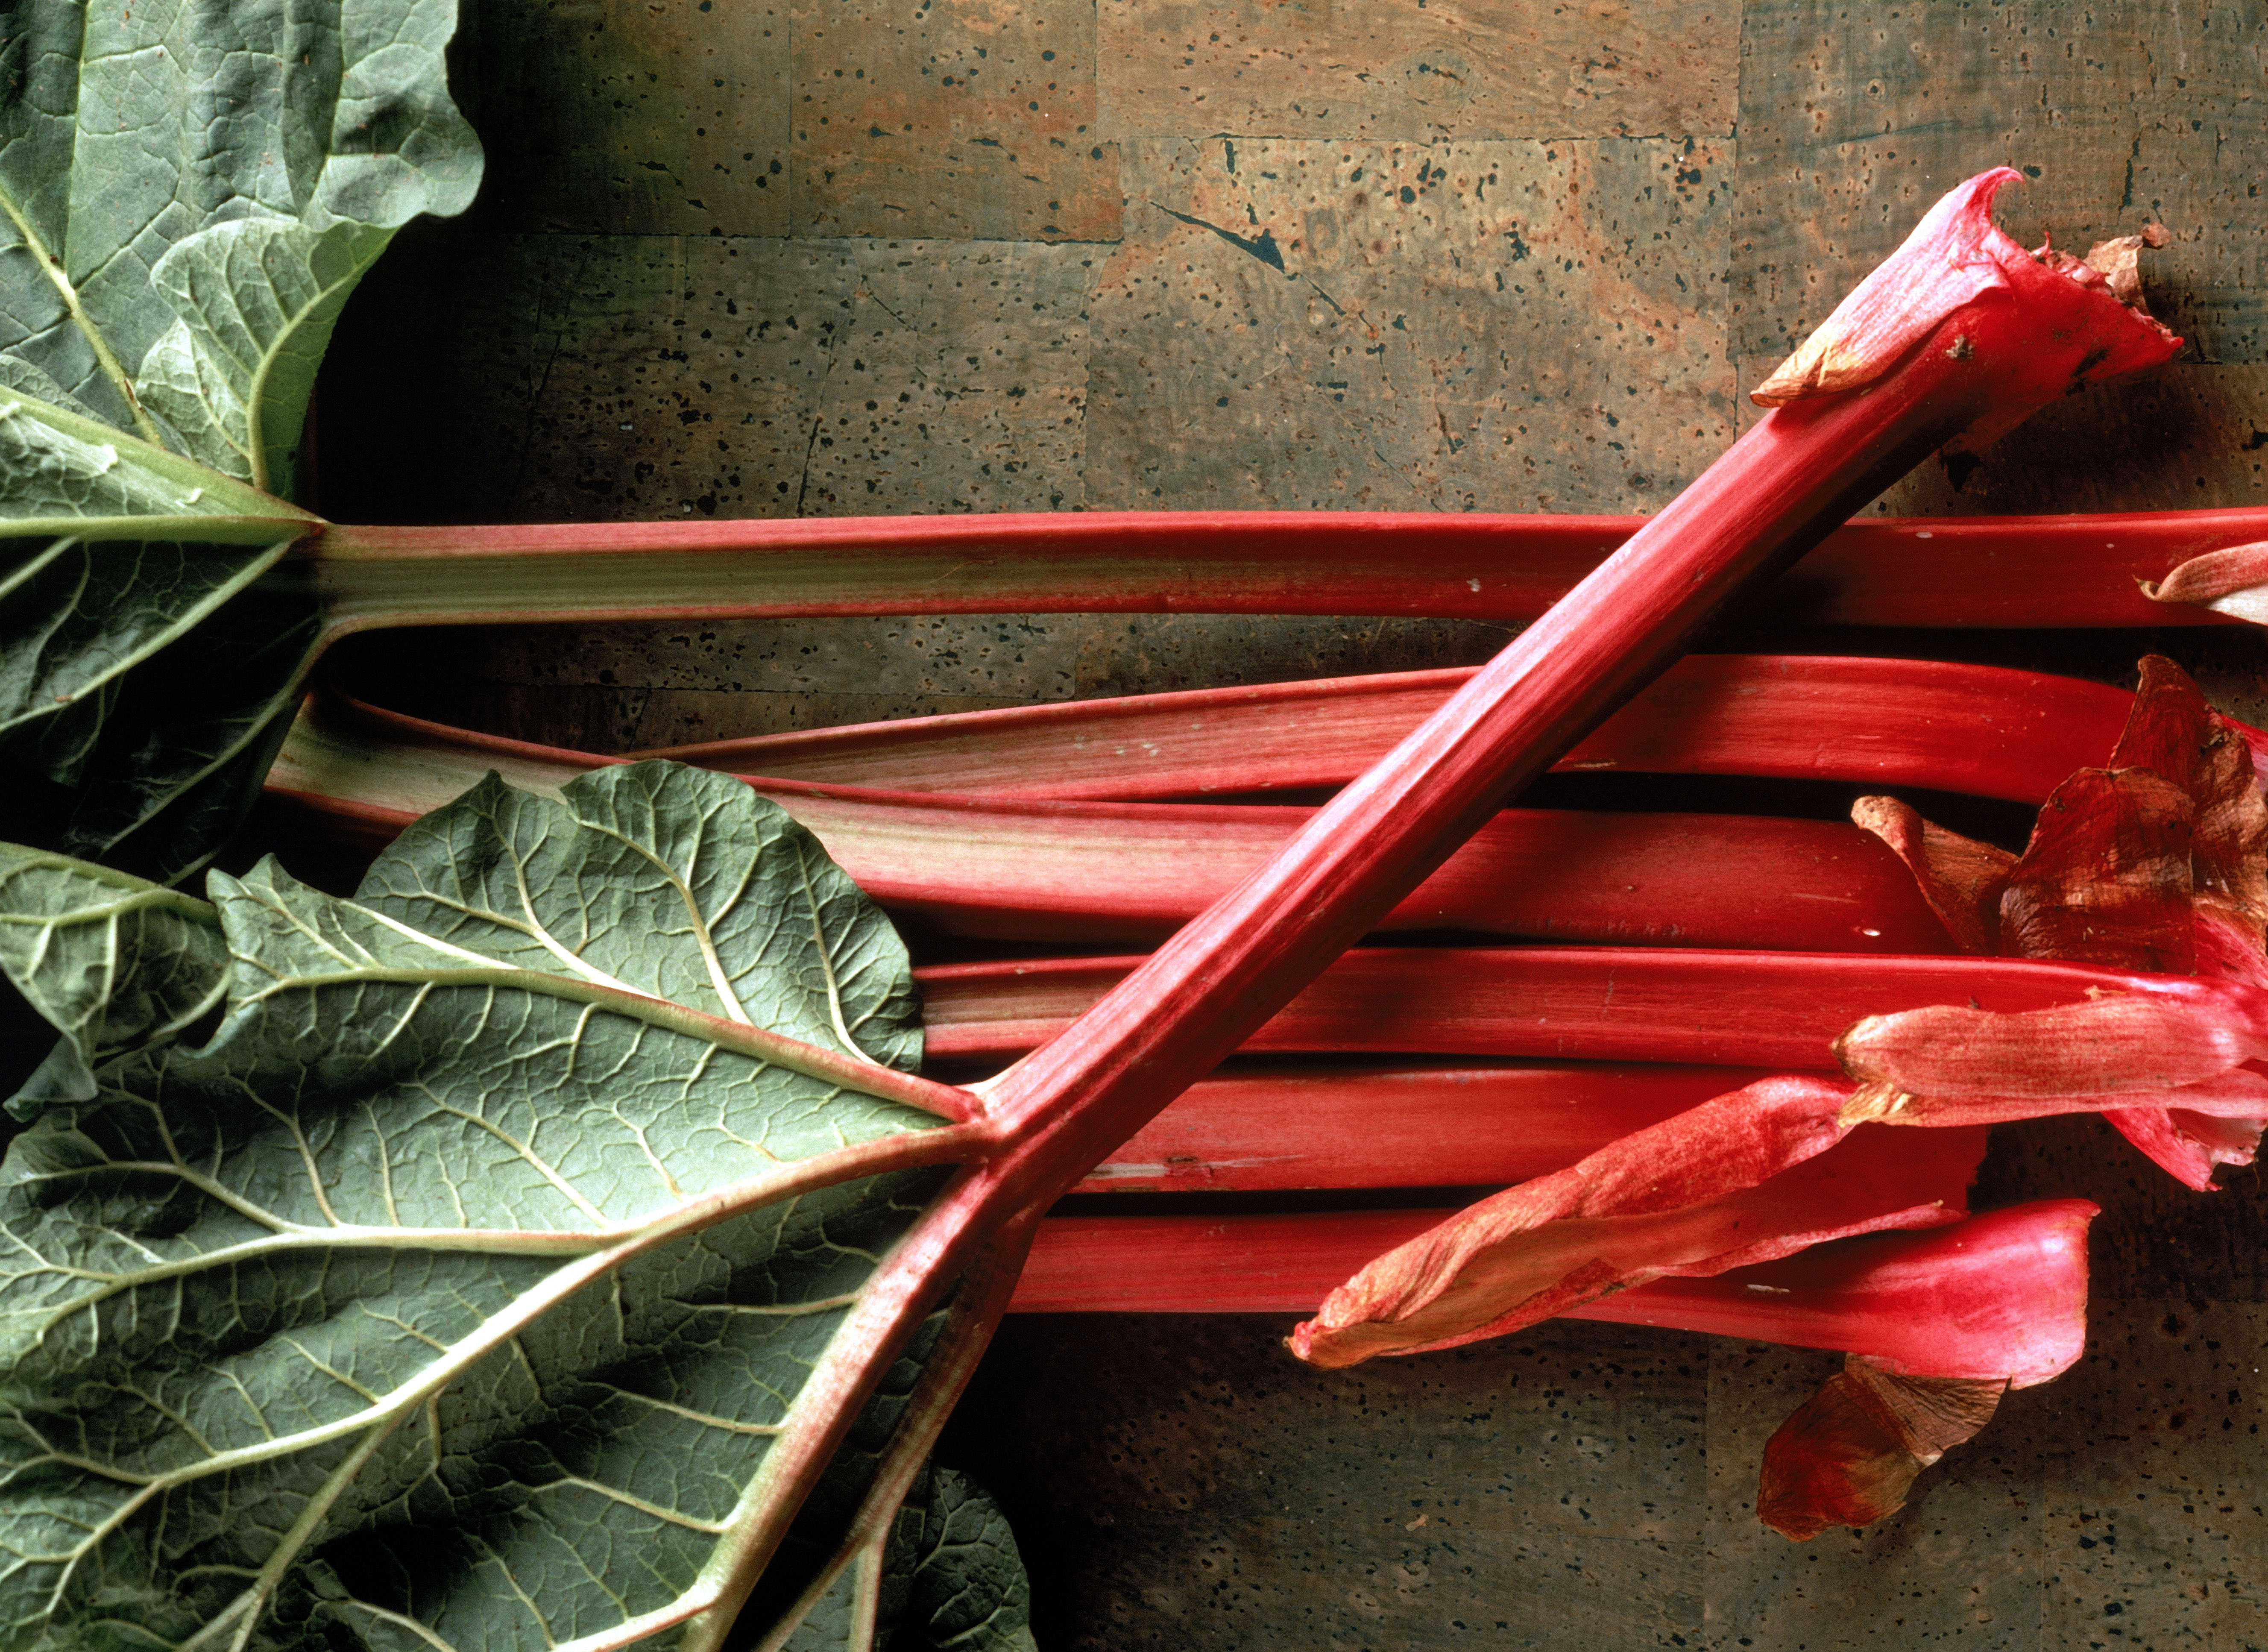 Rhubarb can begin to appear in the Spring, but it can have a long summer season in some states. Remember to only eat the stalks and not the leaves, which are poisonous.